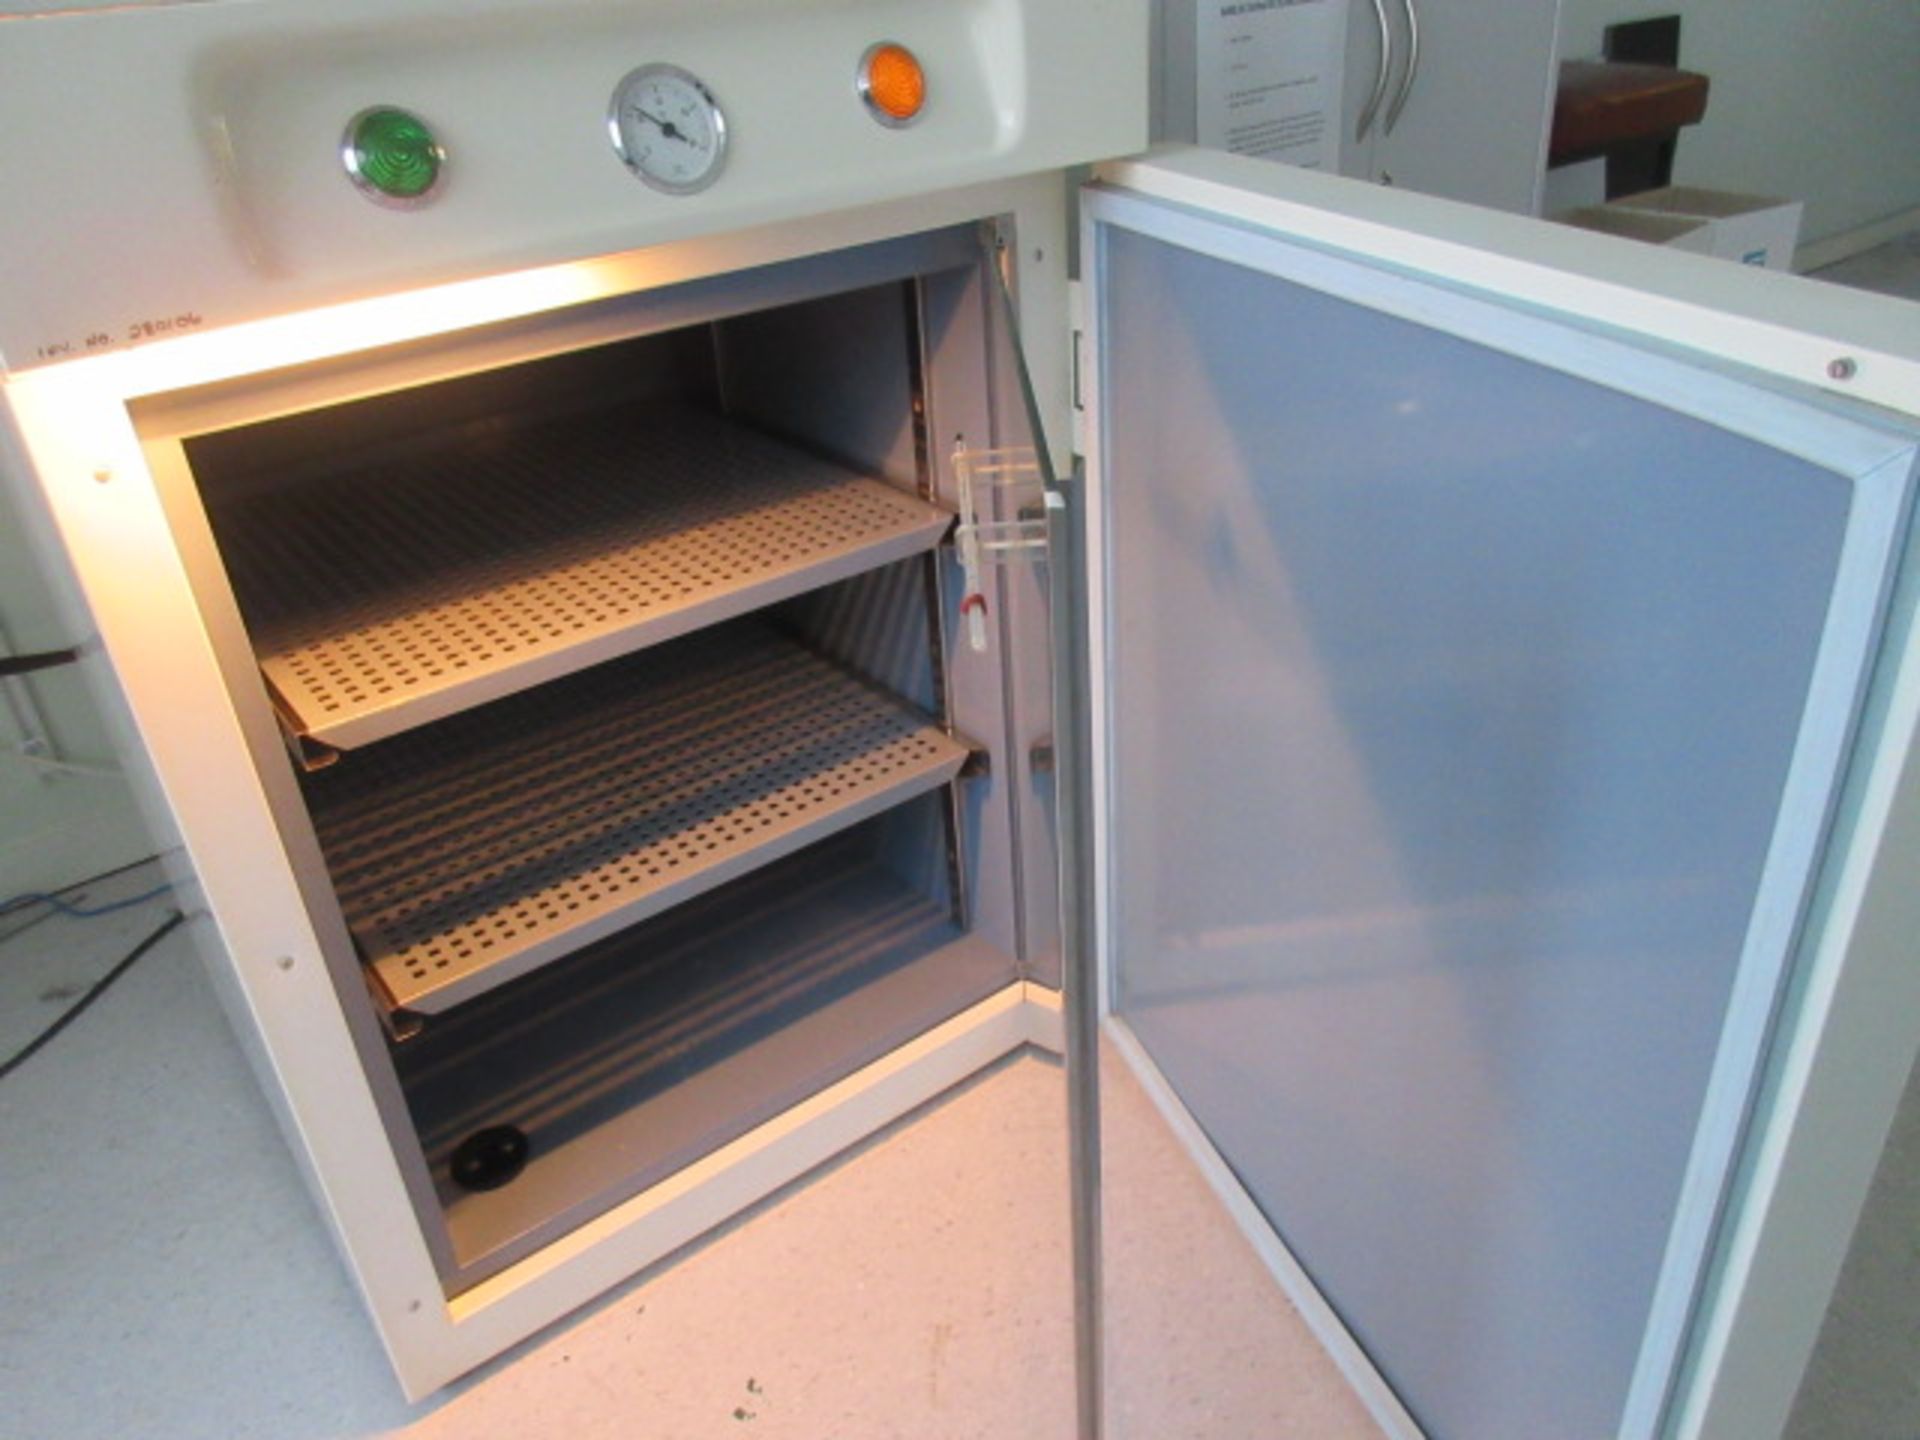 LABORATORY & ELECTRICAL ENG Co P2 ELECTRIC OVEN 480mm WIDE x 480mm DEEP x 600mm HIGH 240V - Image 2 of 3